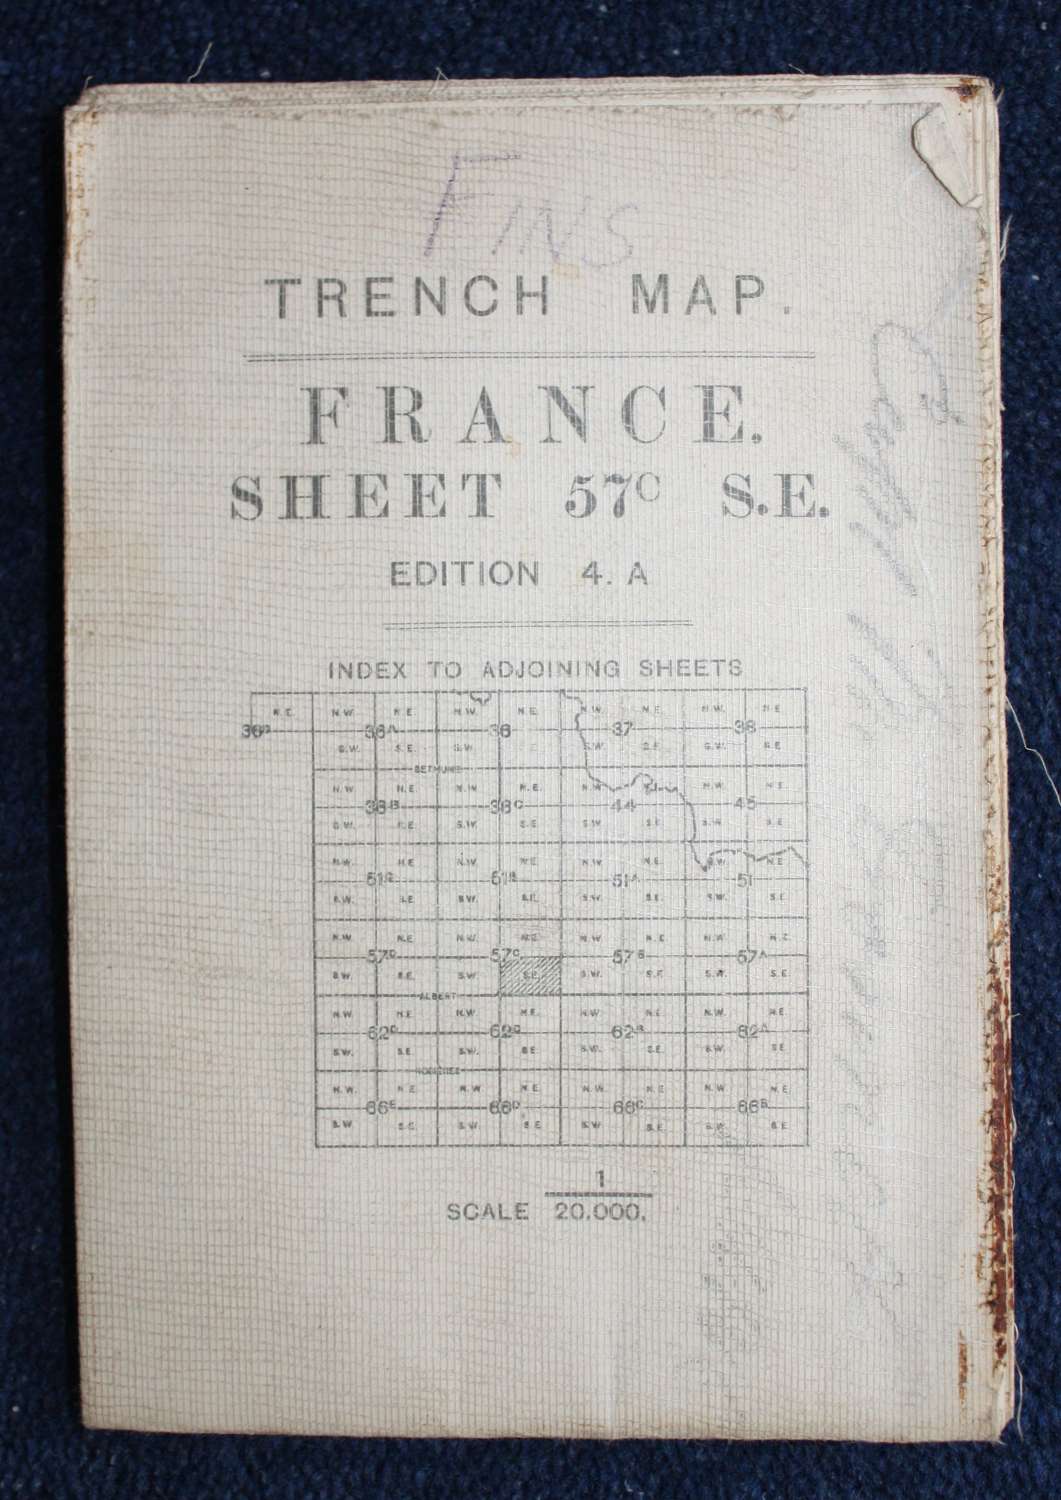 WW1 British Army Trench Map France: 57C SE Gouzeaucourt 11th May 1917